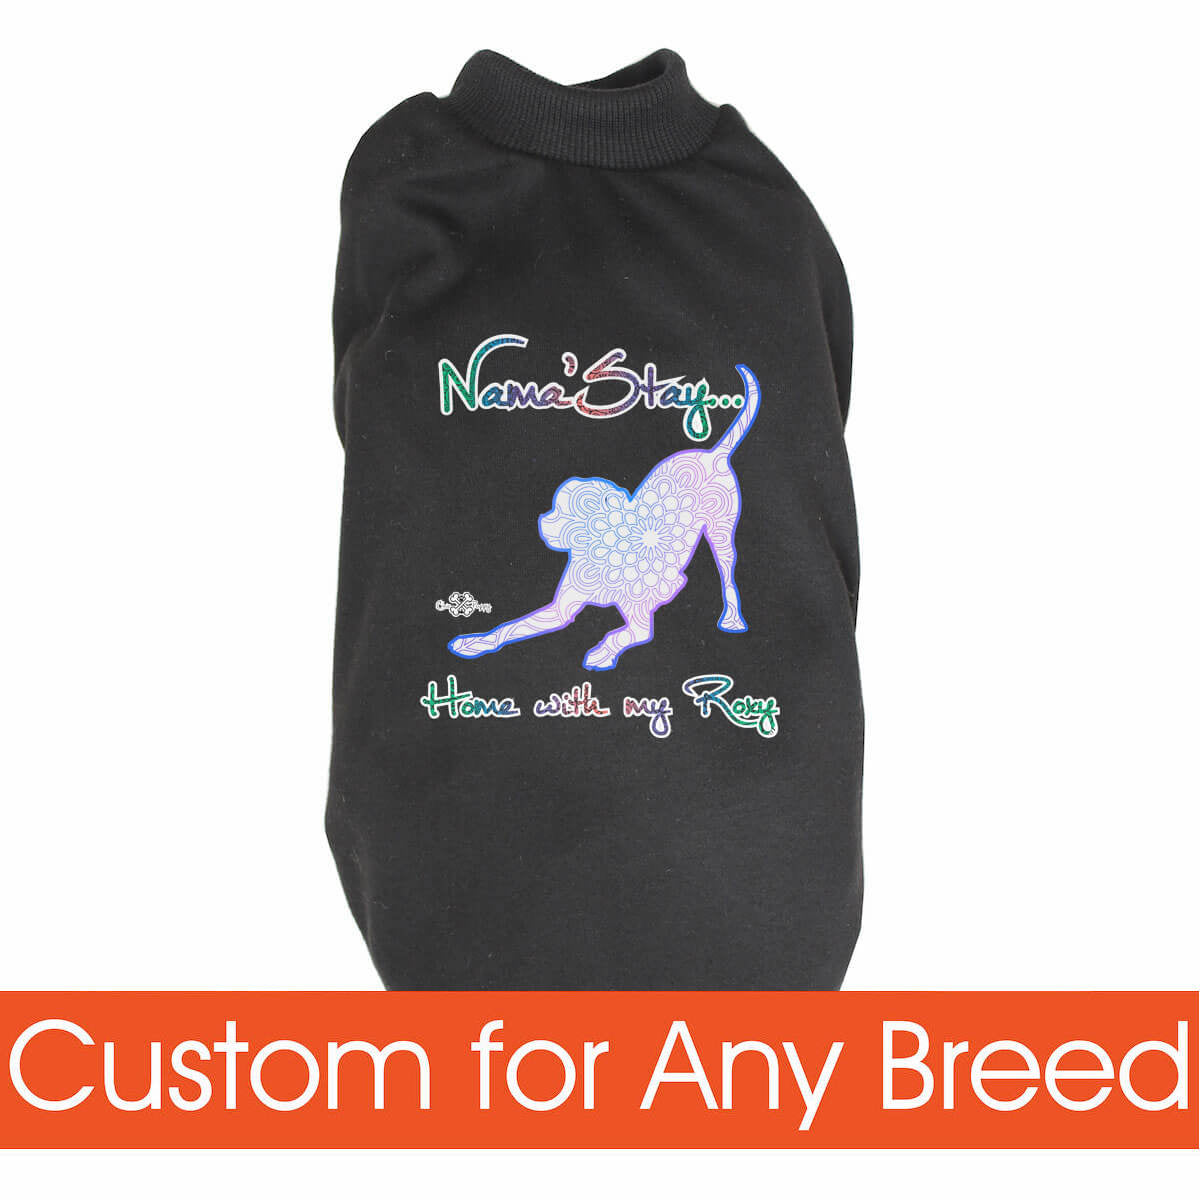 Matching Dog and Owner - Mandala Pups Silhouette - Dog Shirts & Hoodies - Dogs